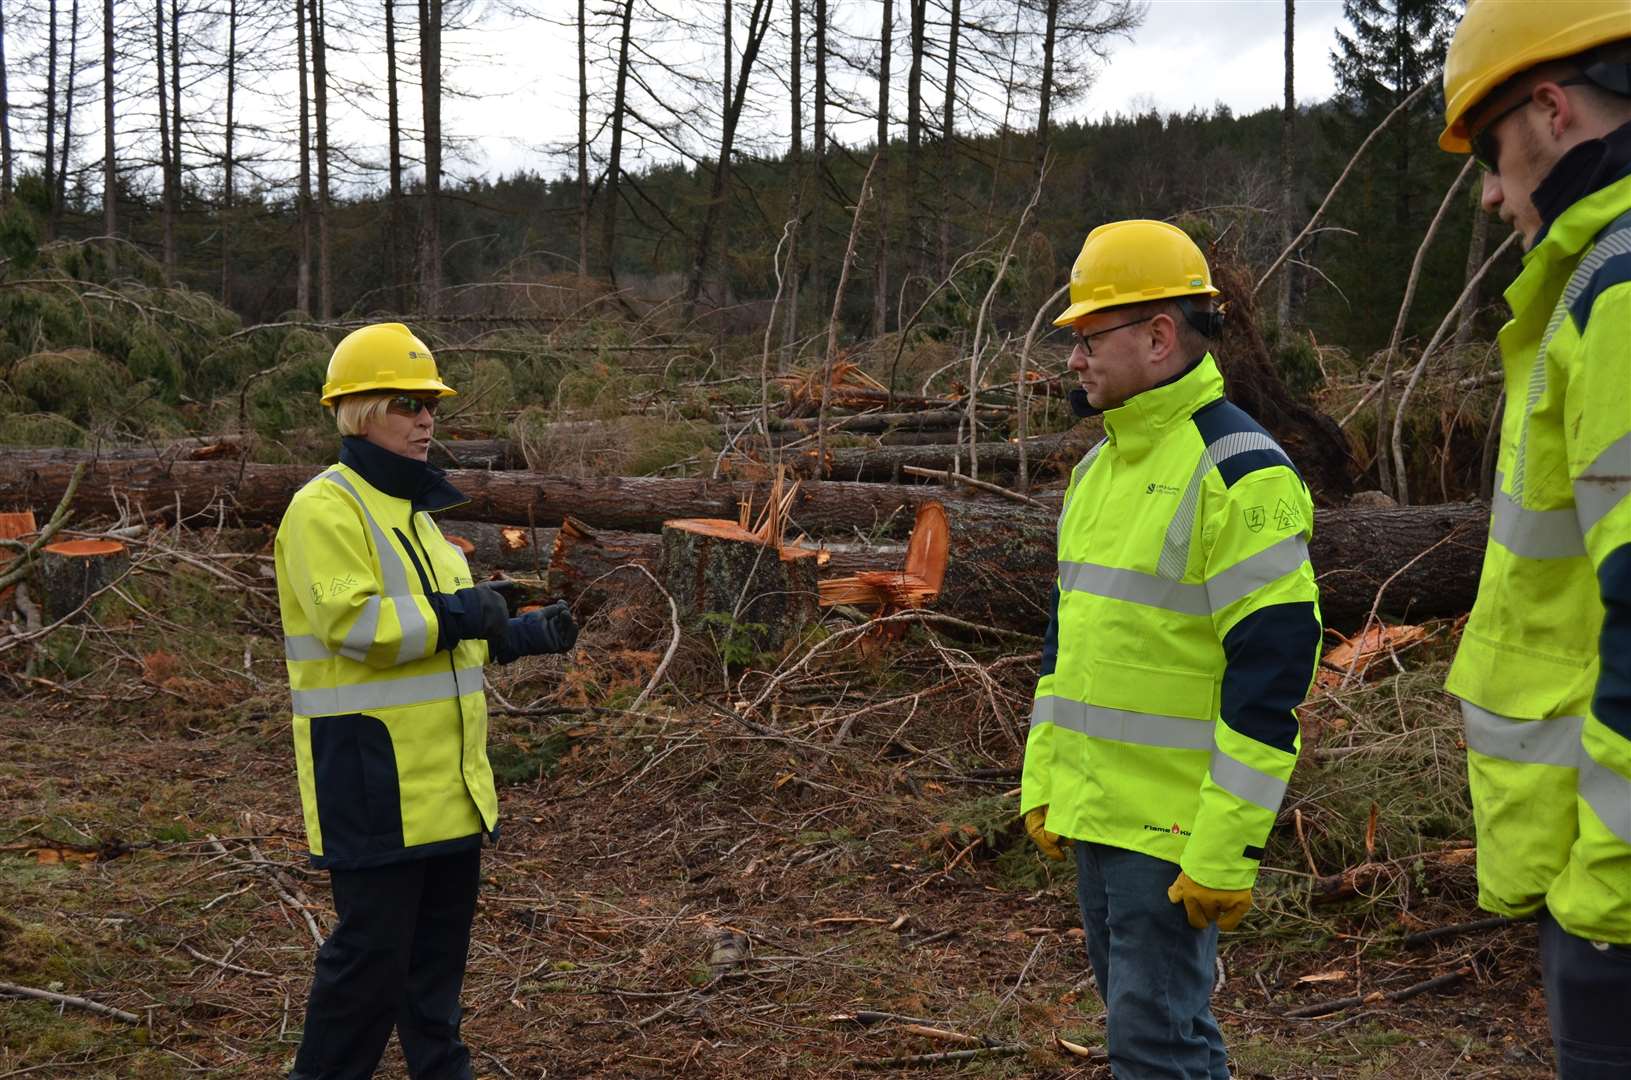 MP Richard Thomson with SSEN staff at Pitfichie Forest being briefed on clearance work in the aftermath of Storm Arwen.